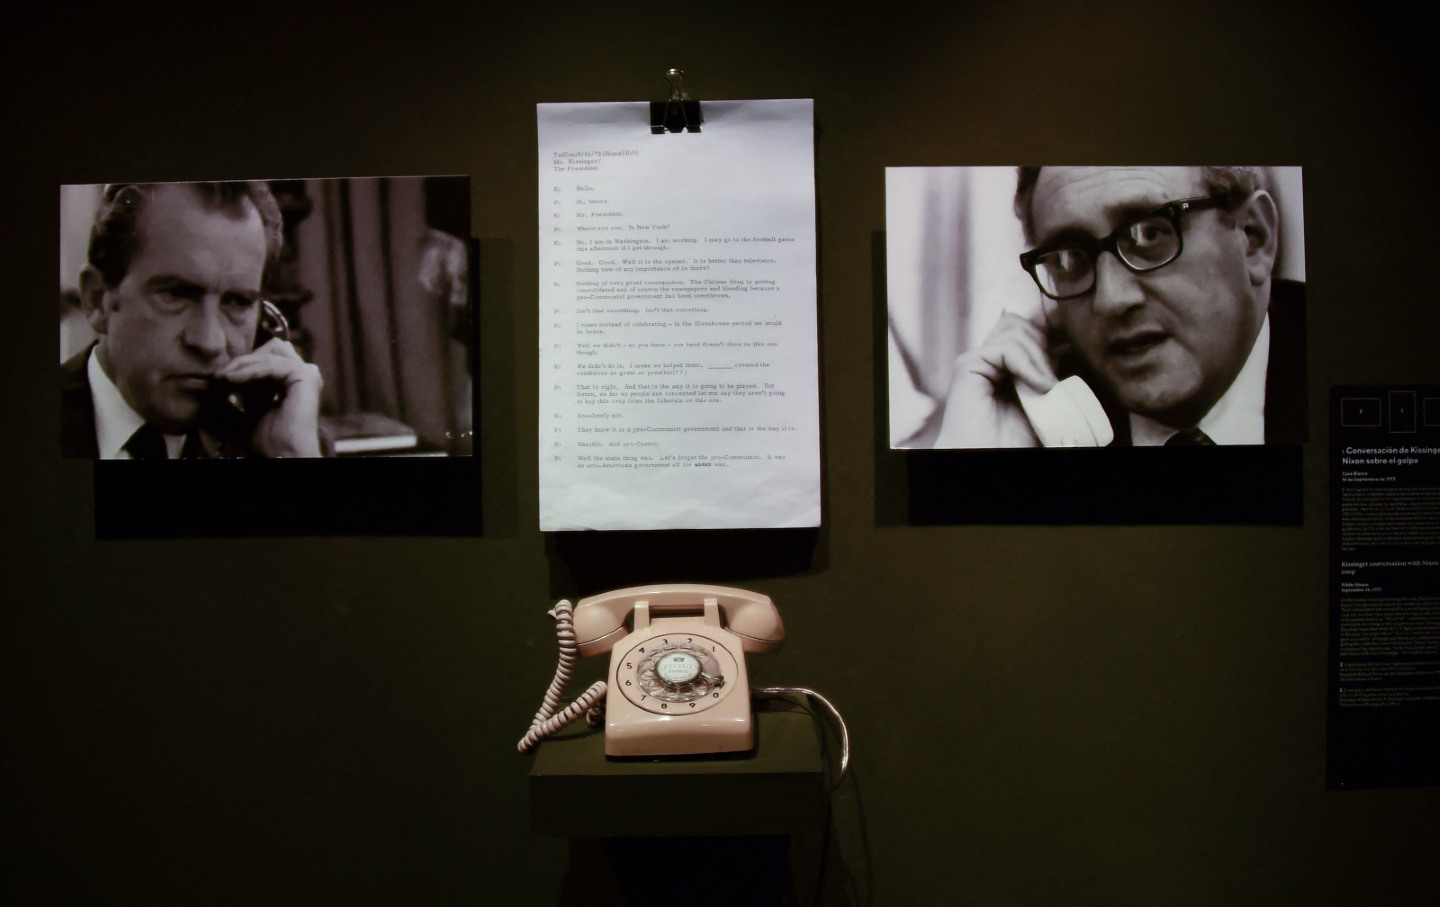 Photographs of Richard Nixon and Henry Kissinger displayed during “Secrets of State: The Declassified History of the Chilean Dictatorship,” an exhibition at the Museum of Memory and Human Rights in Santiago, Chile.